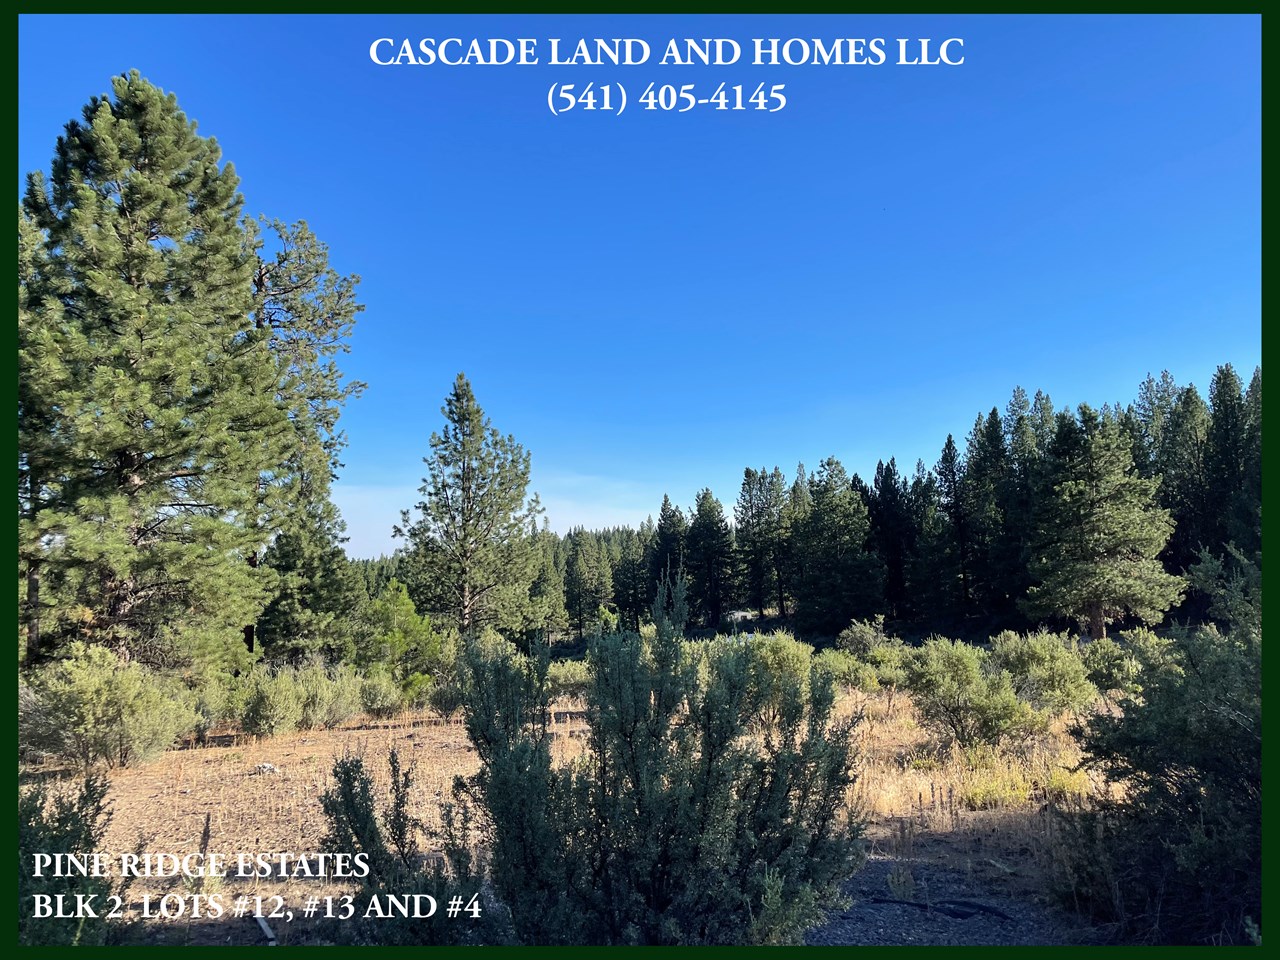 the varied landscape and terrain on this property will accommodate many different home and living styles. make sure and check with klamath county, this subdivision does have an hoa to help the community living standards, so get those plans approved right away and start building!